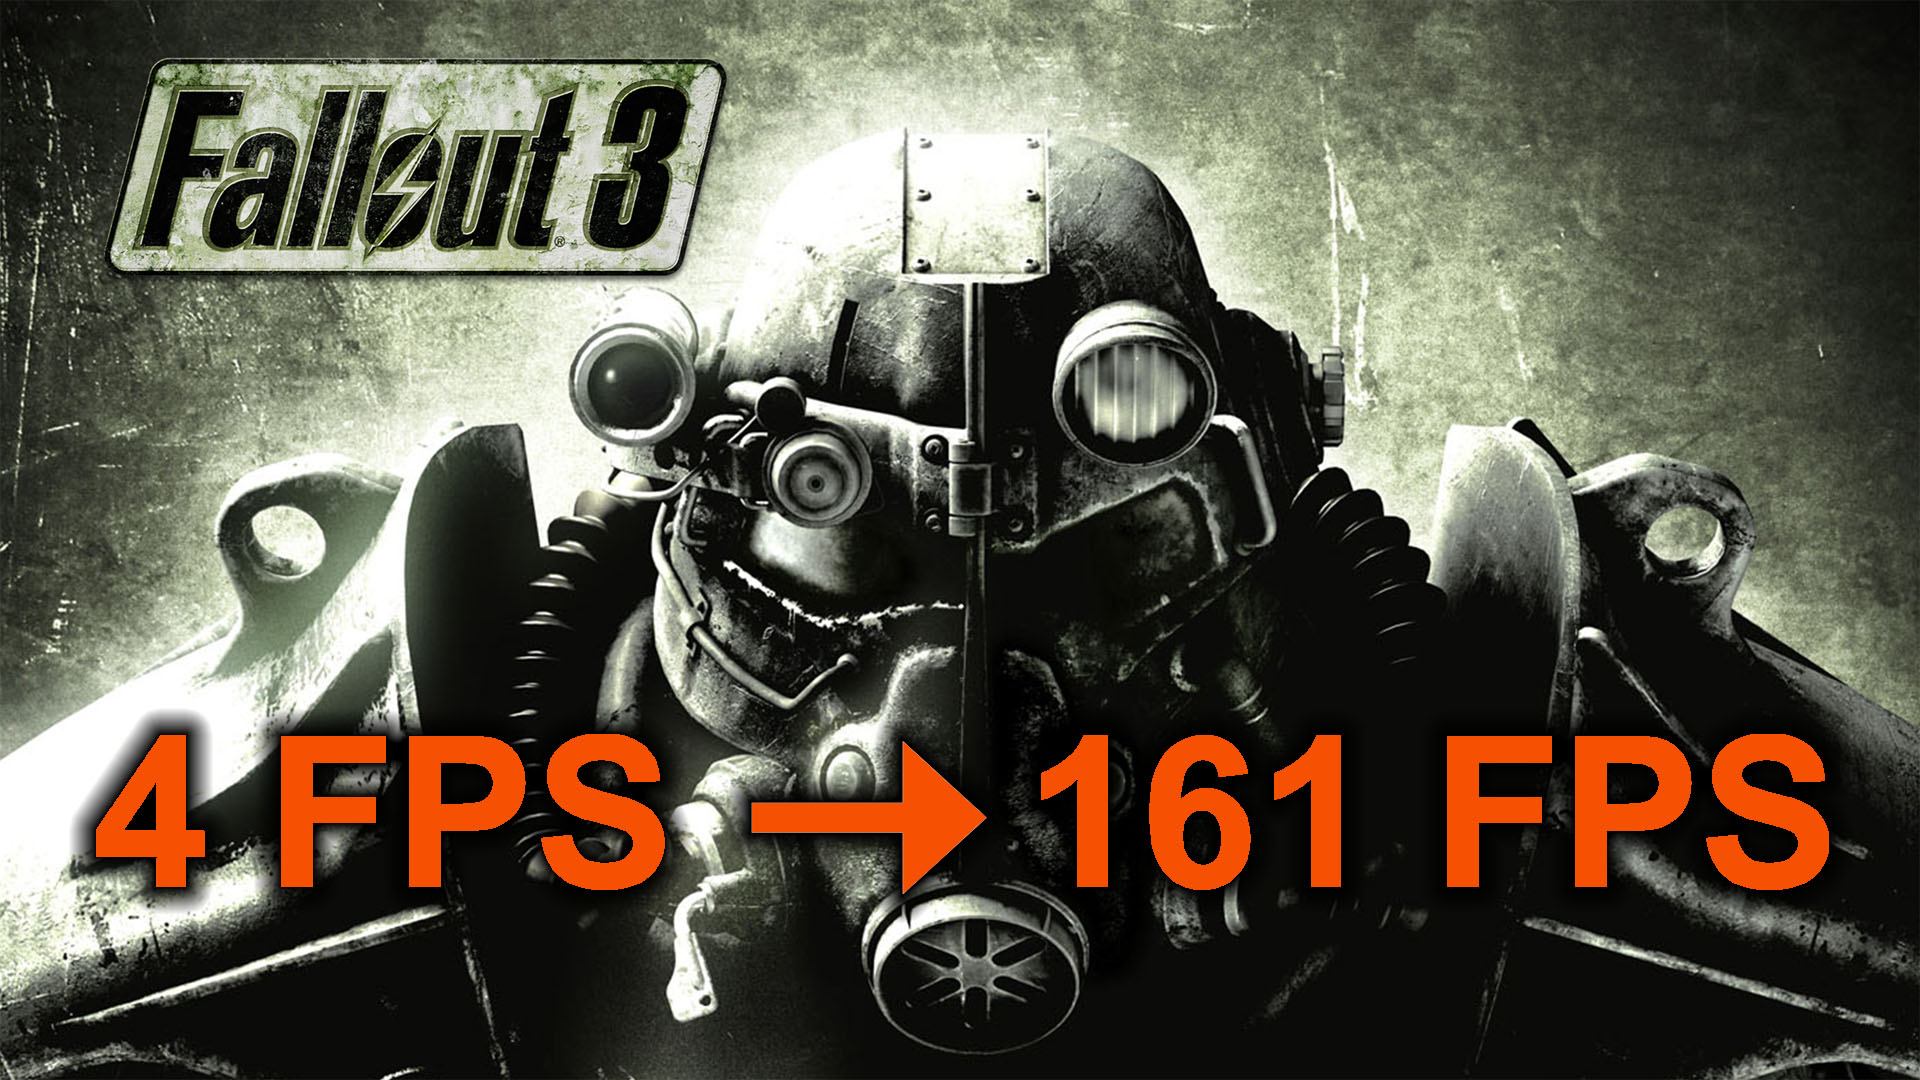 Fallout 3 is broken for some, but here’s some ways to fix it